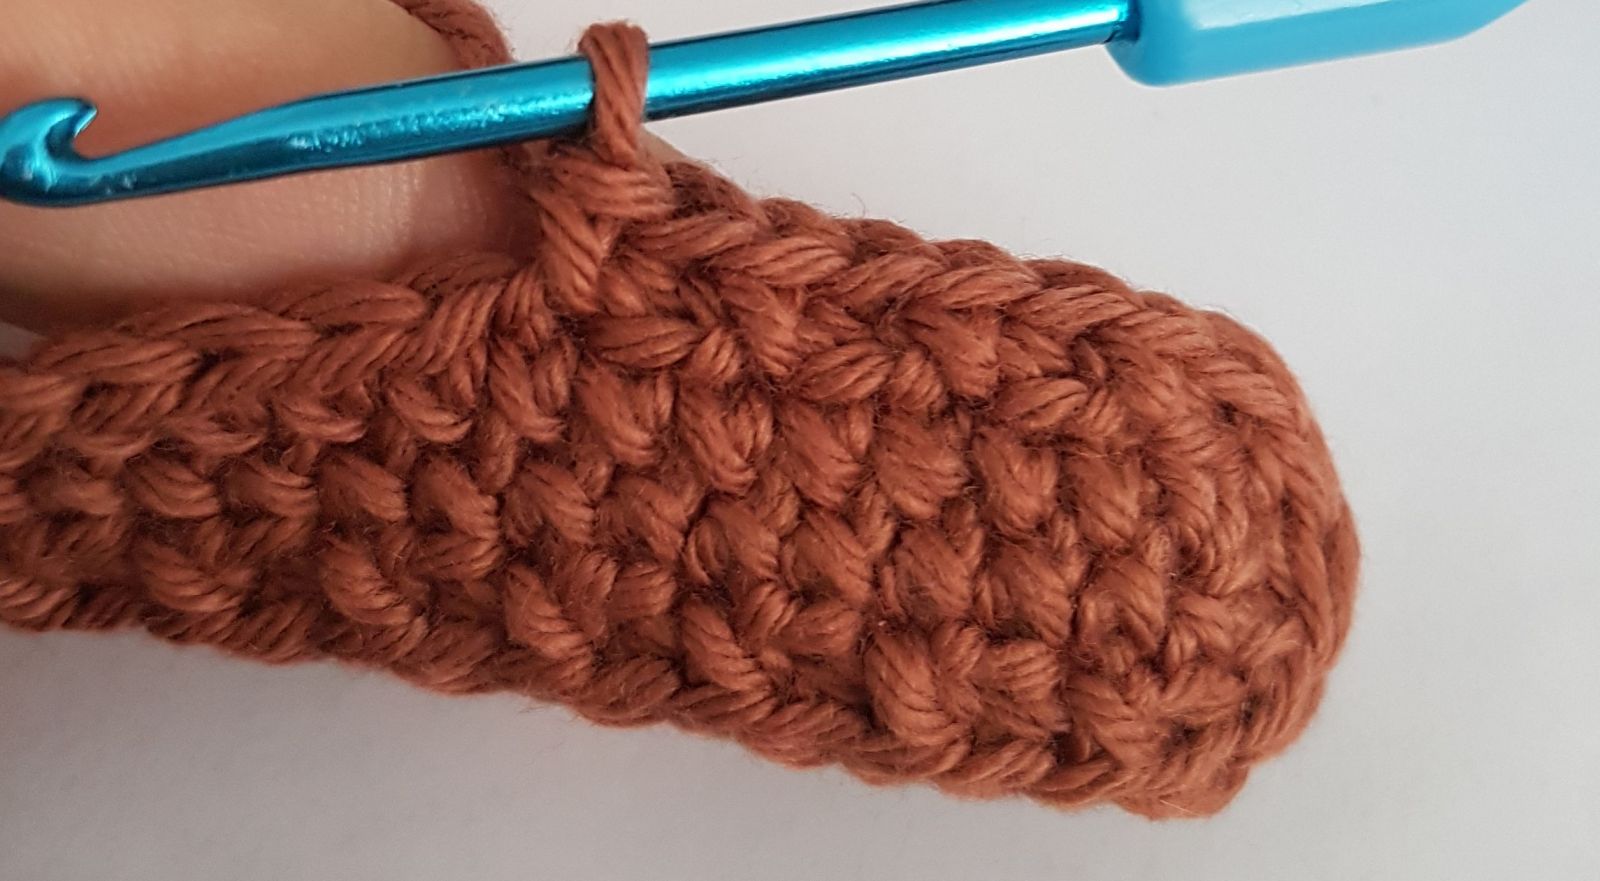 Blog content image for 'Free crochet pattern key case'